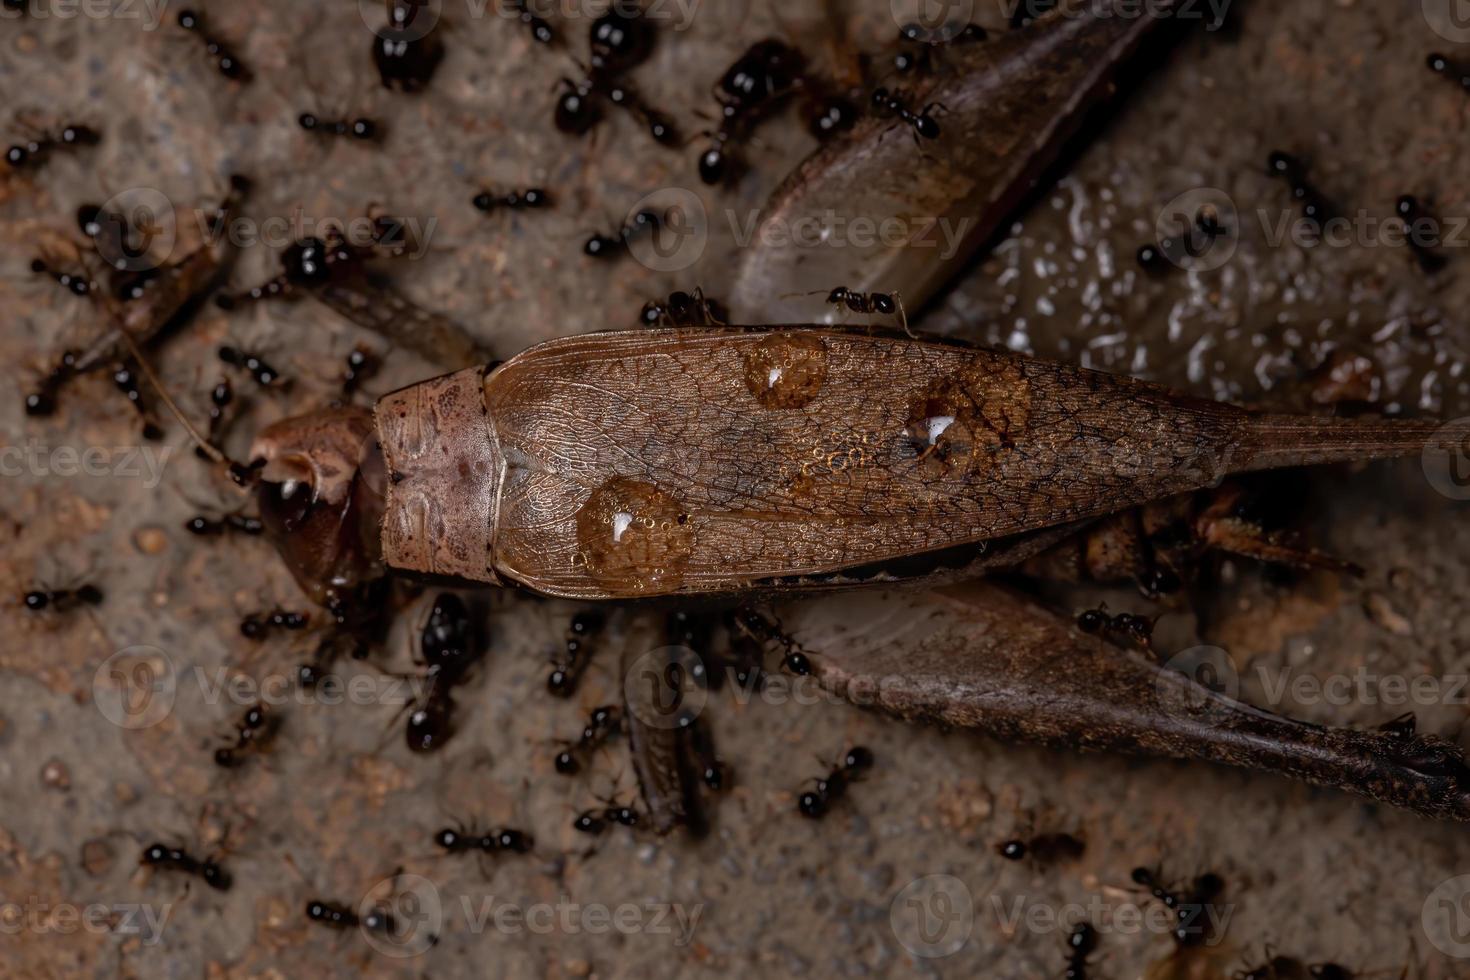 African Big-headed Ant preying on a True Cricket photo